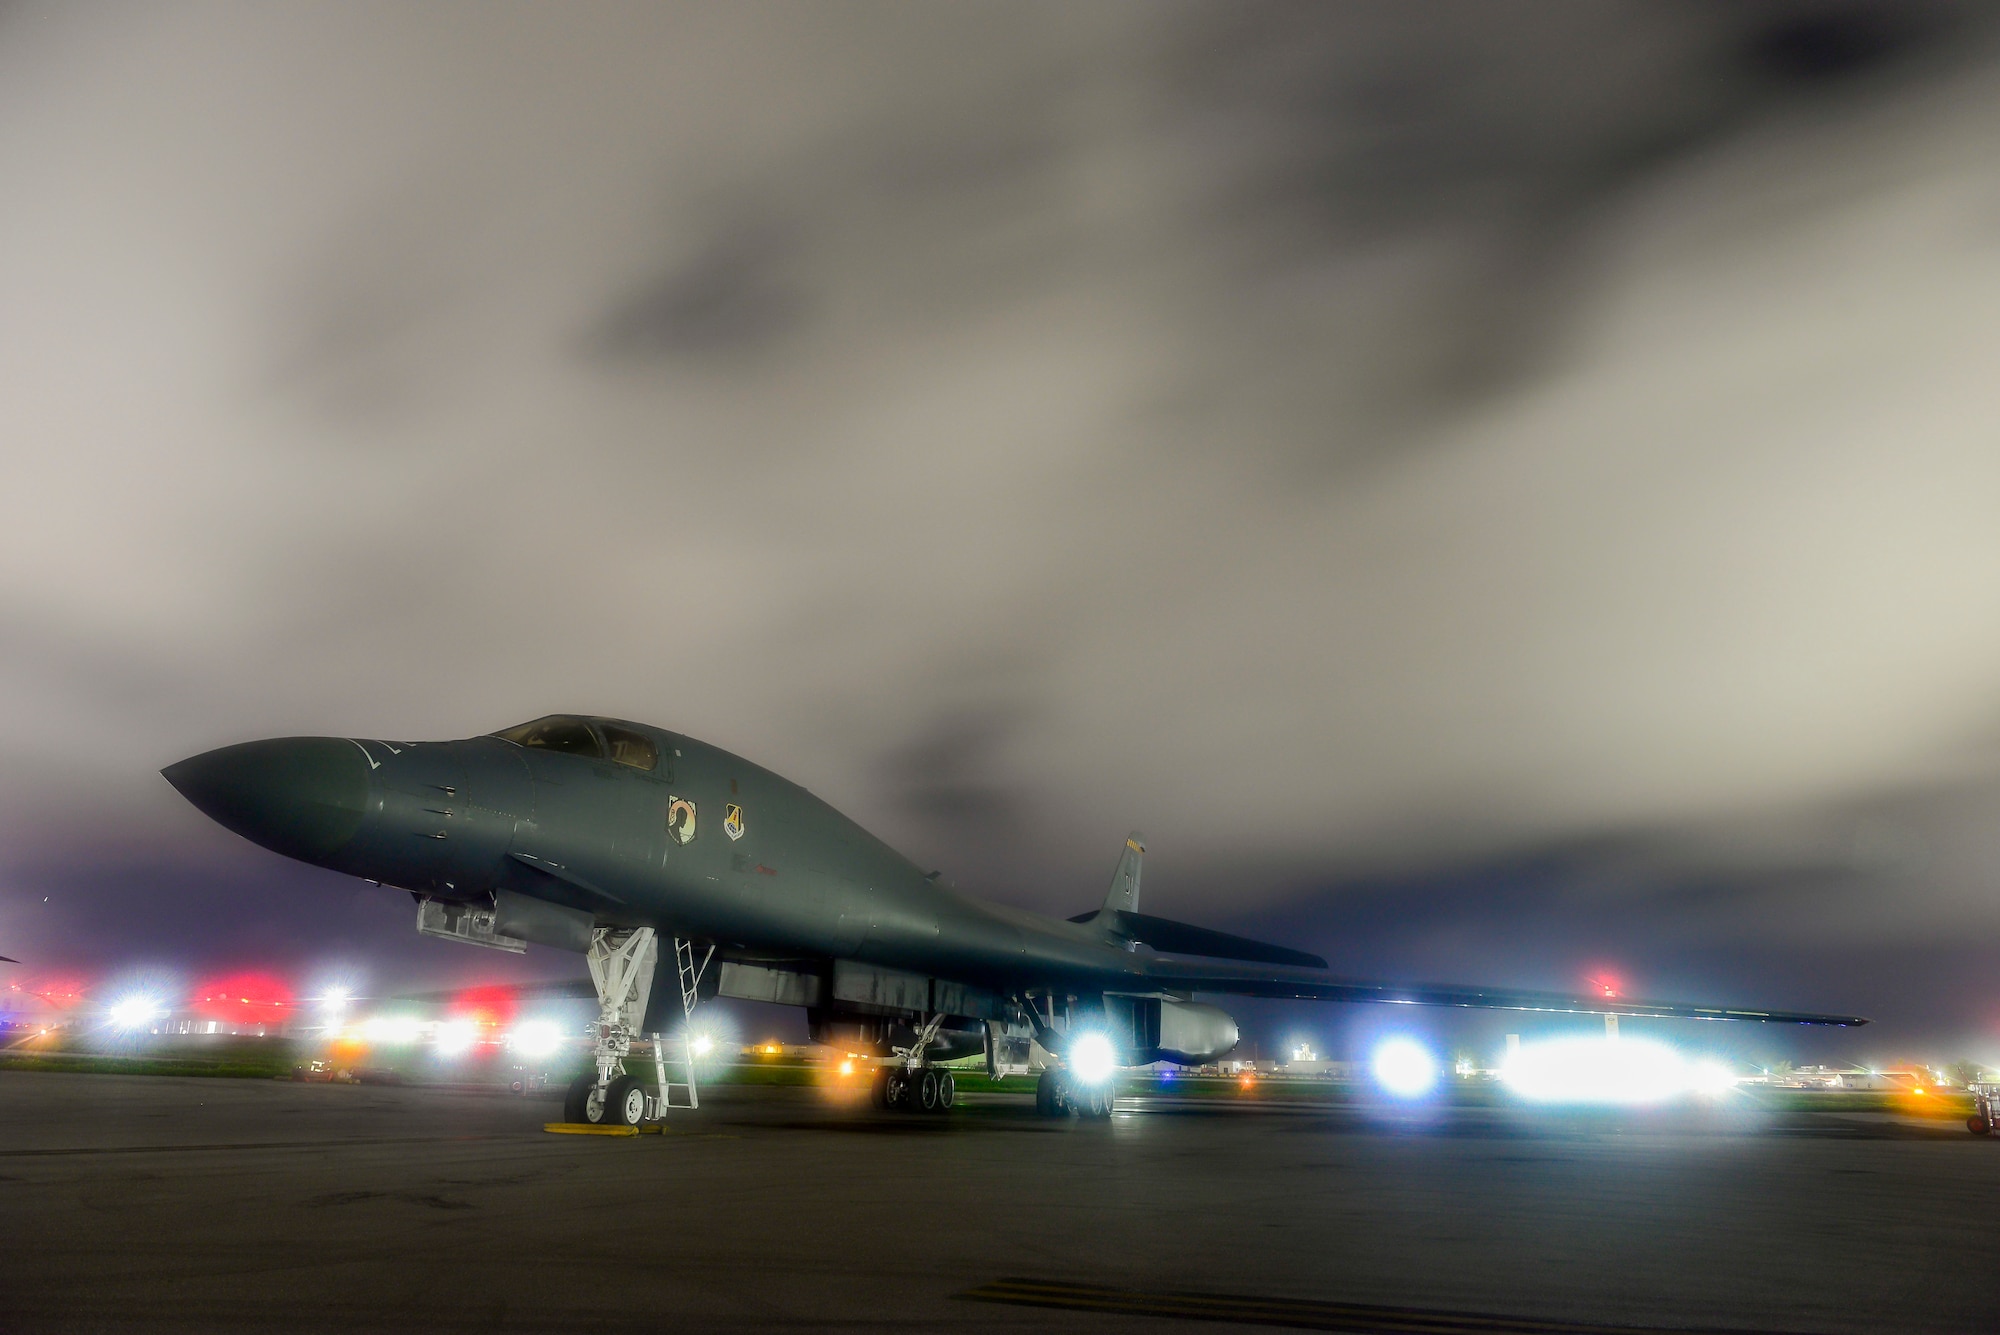 A U.S. Air Force B-1B Lancer assigned to the 9th Expeditionary Bomb Squadron, deployed from Dyess Air Force Base, Texas, sits on the runway at Anderson Air Force Base, Guam July 18, 2017. The Lancer departed Guam to conduct bilateral training missions with Royal Australian Air Force Joint Terminal Attack Controllers (JTACs) for Talisman Saber 17. The flights were also flown as part of U.S. Pacific Command’s Continuous Bomber Presence mission in order to enhance combined interoperability with Australian counterparts. (U.S. Air Force photo by Airman 1st Class Christopher Quail)